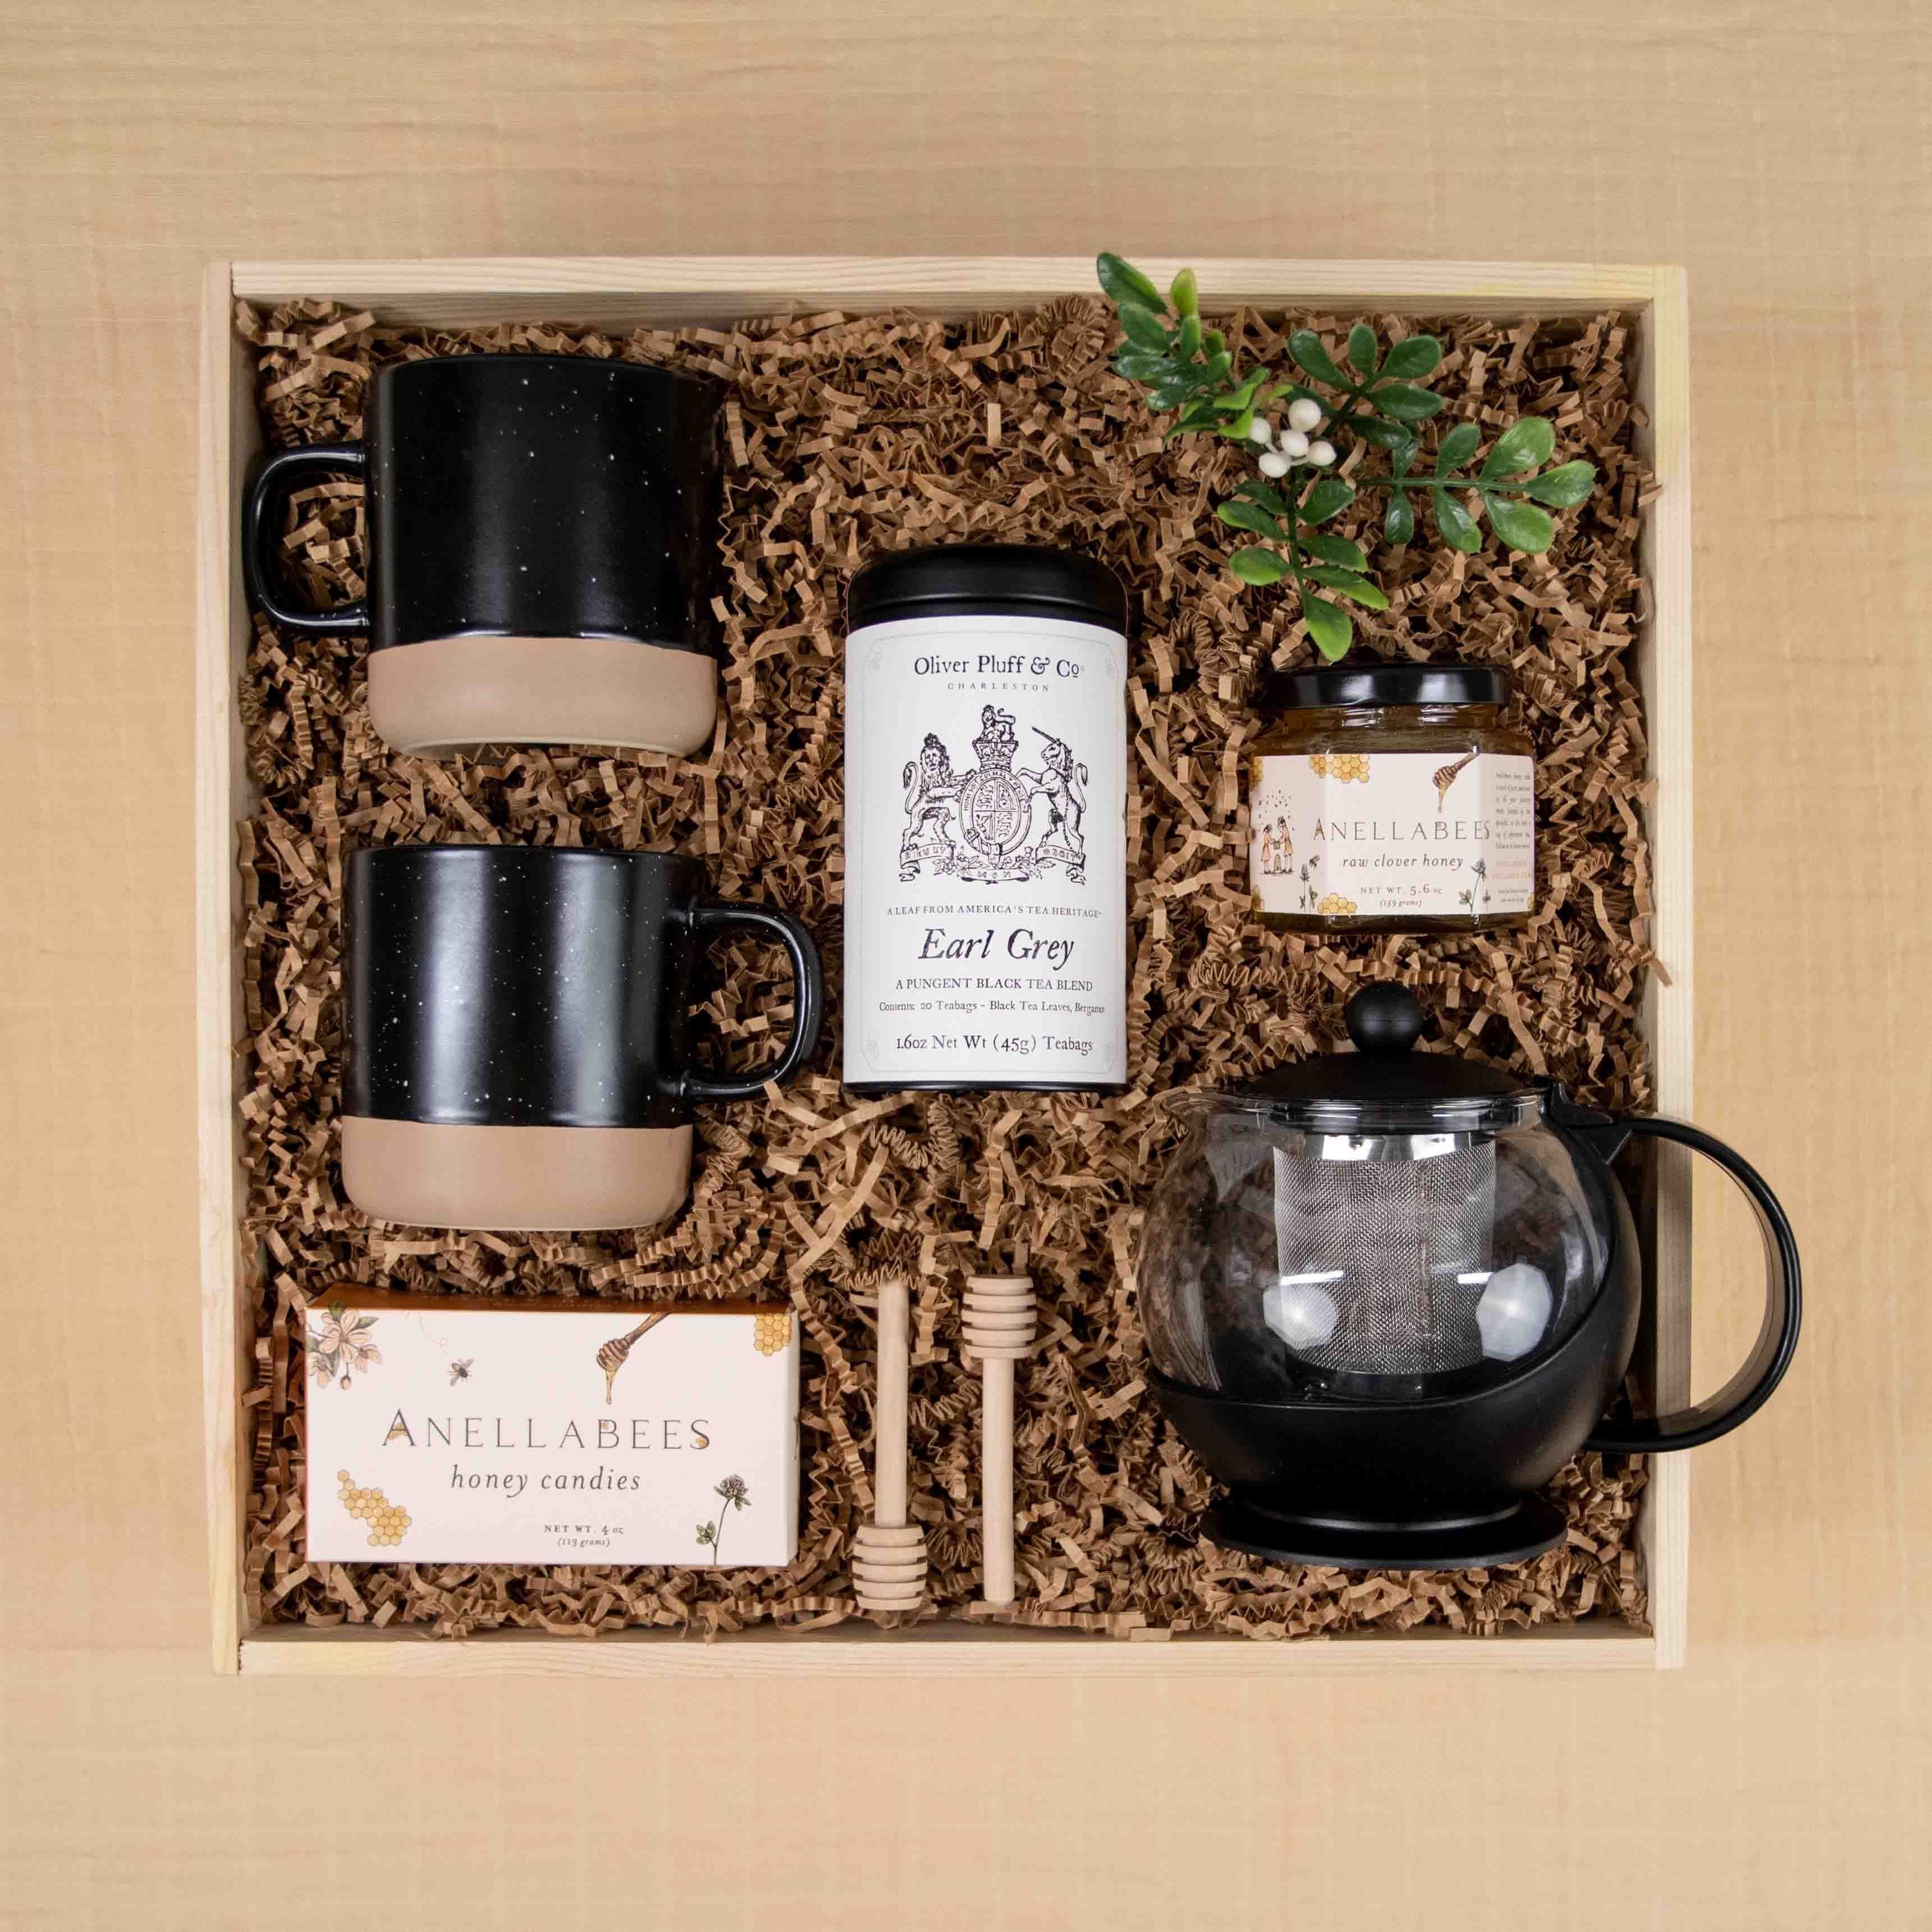 35 Best Gifts for Tea Lovers 2022 - Unique Tea Gifts and Sets